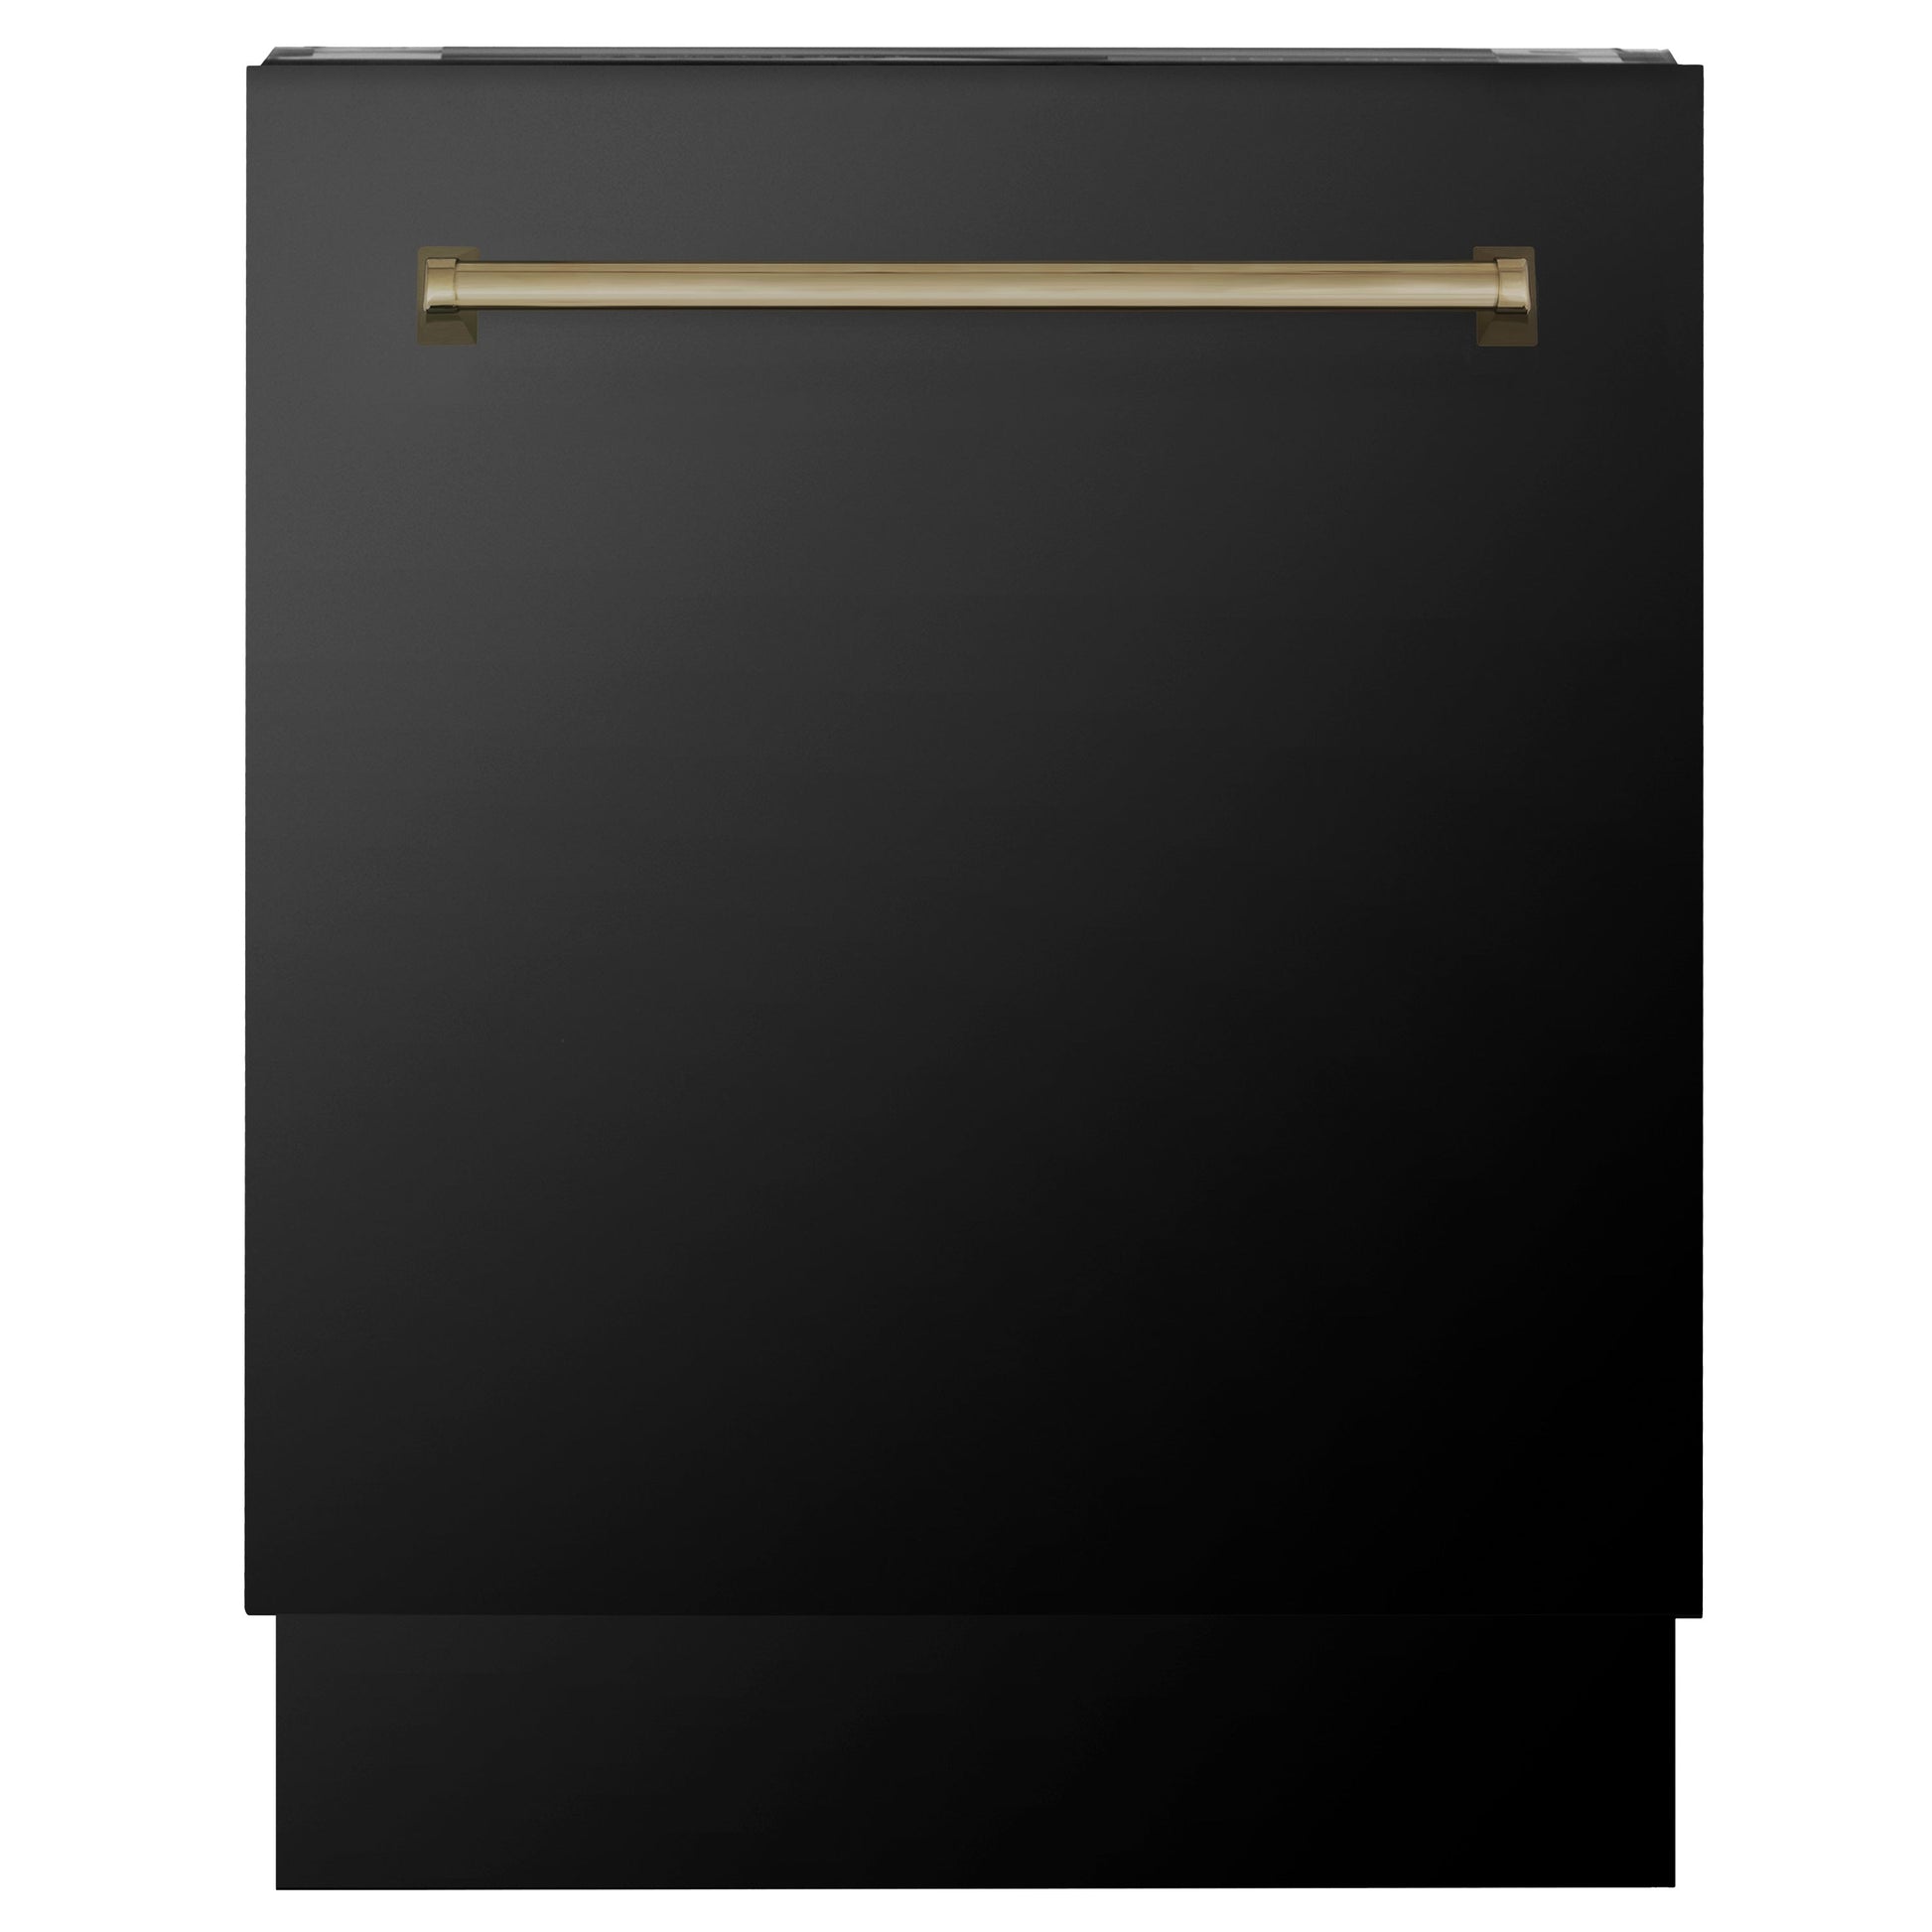 ZLINE Autograph Edition 24 in. 3rd Rack Top Control Tall Tub Dishwasher in Black Stainless Steel with Champagne Bronze Accent Handle, 51dBa (DWVZ-BS-24-CB) front.